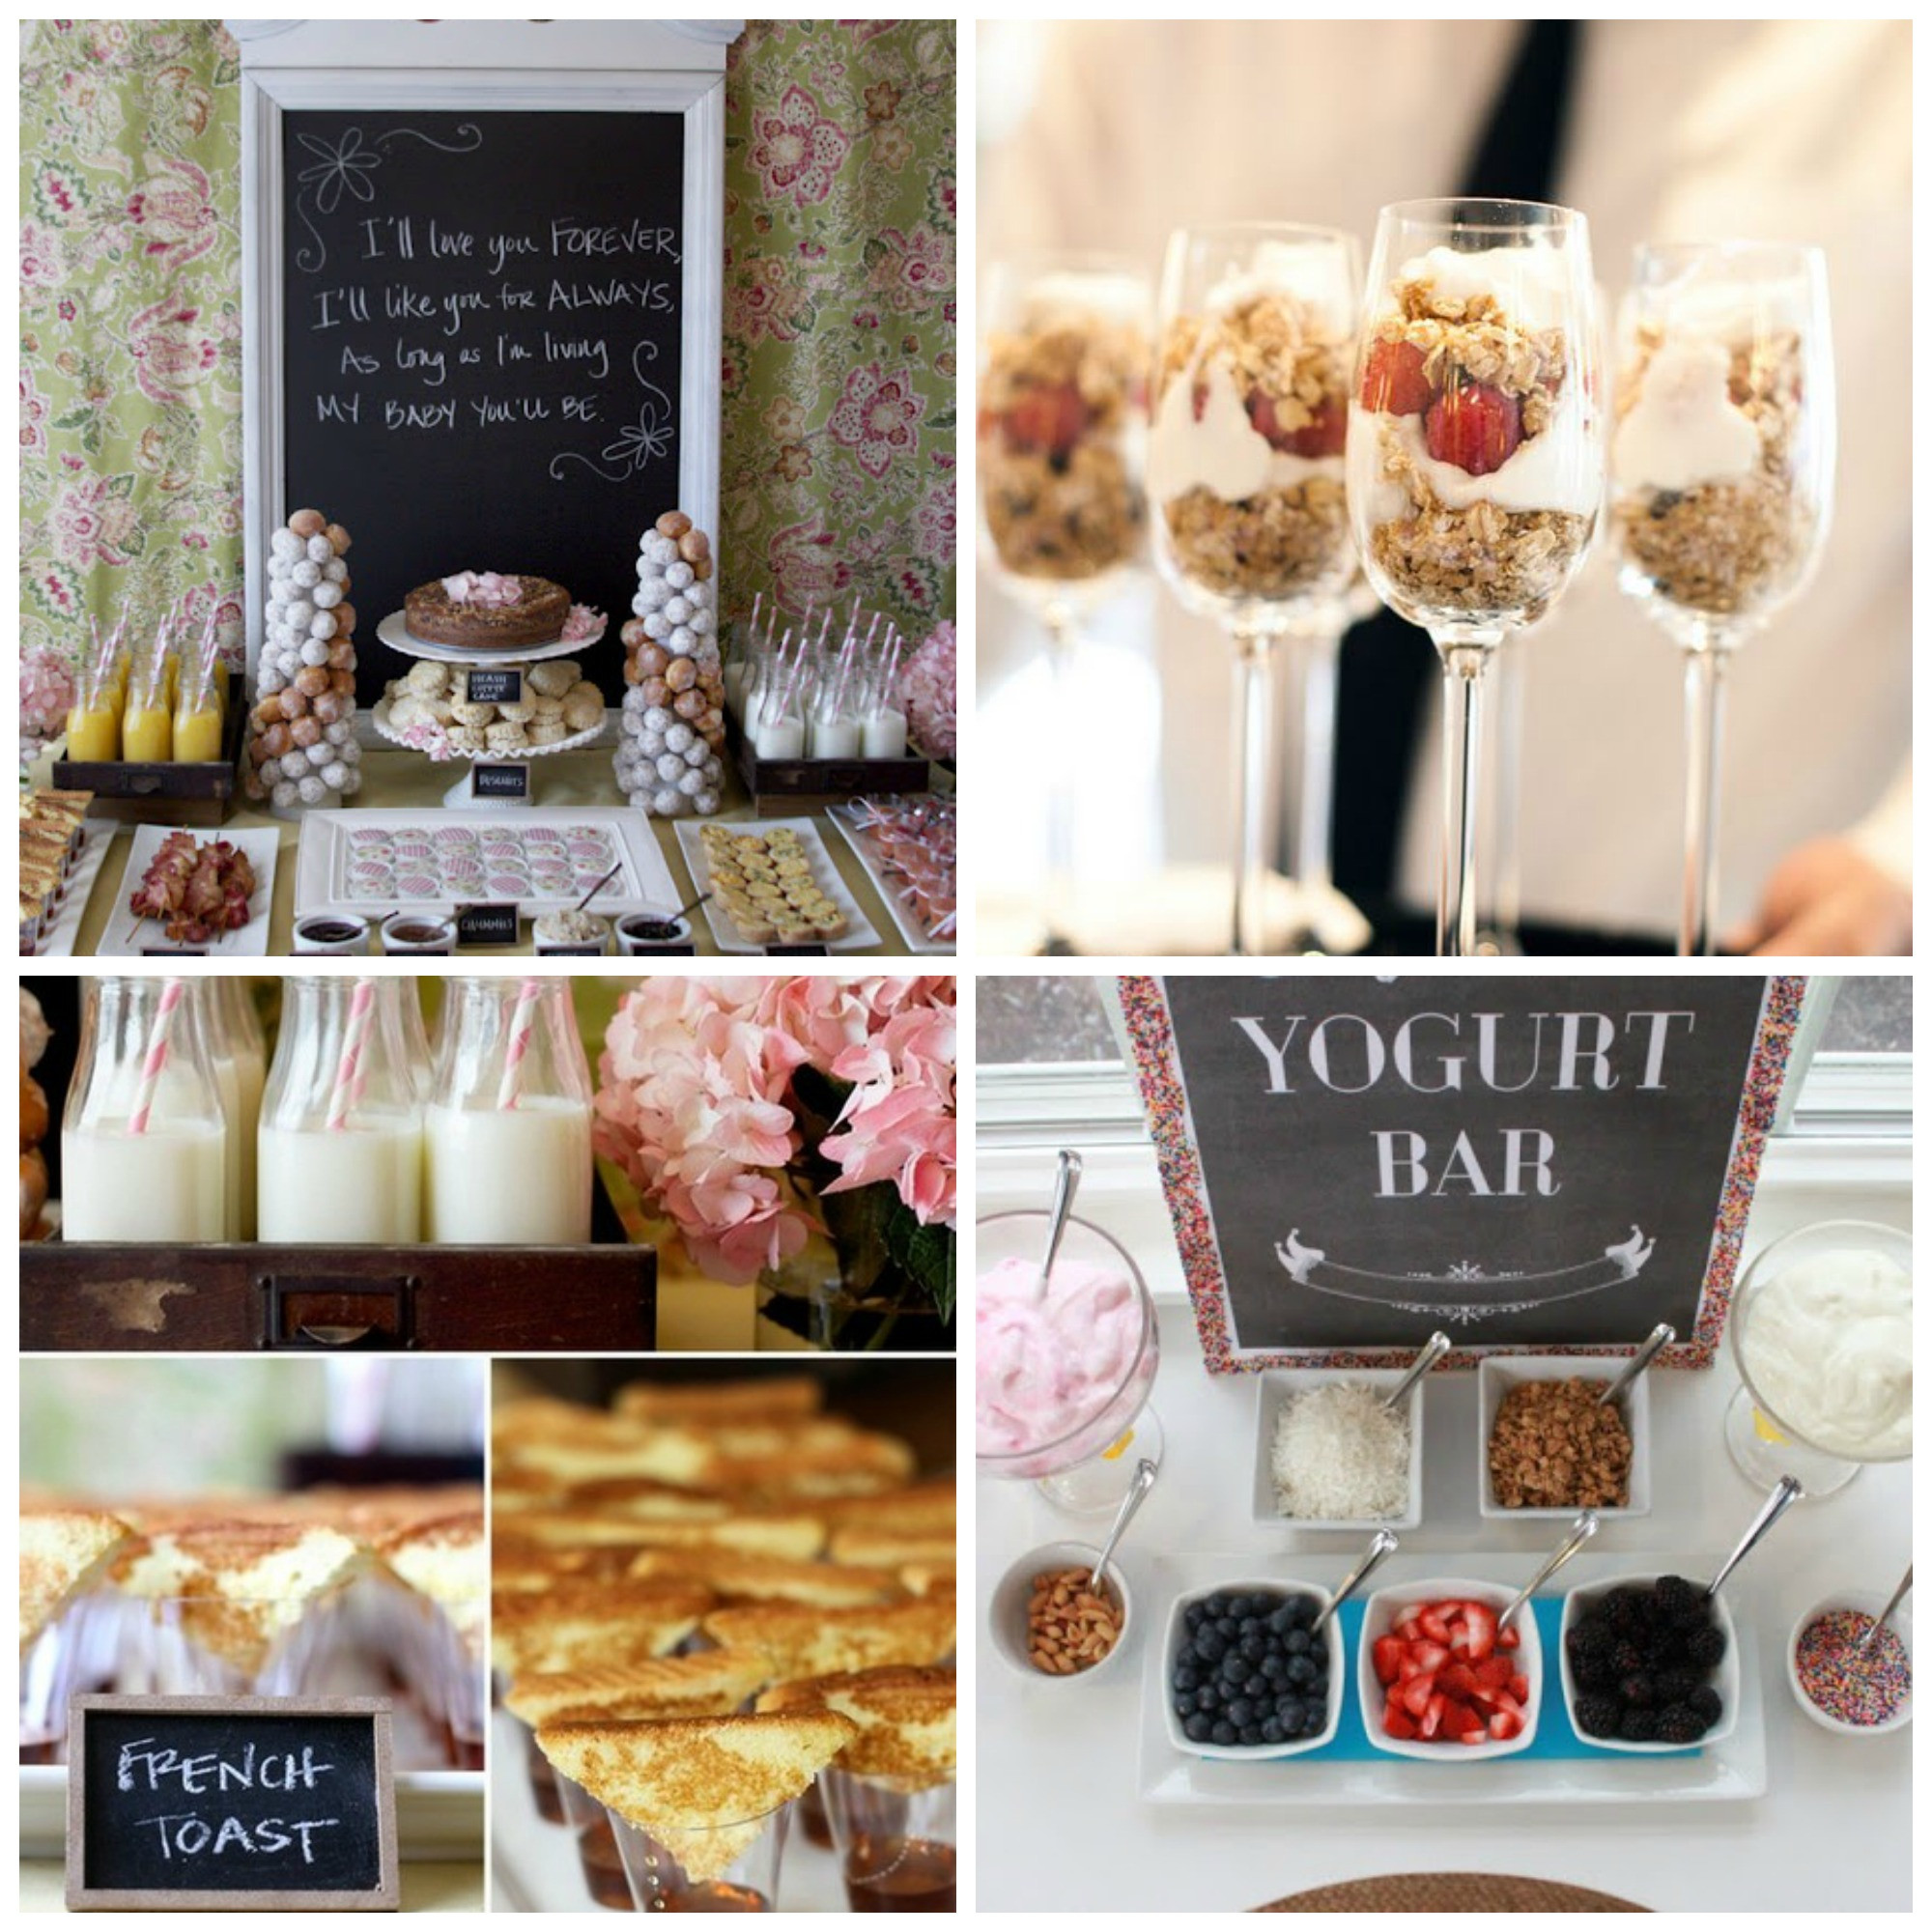 Brunch Engagement Party Ideas
 10 Fun Ideas For Your Engagement Party